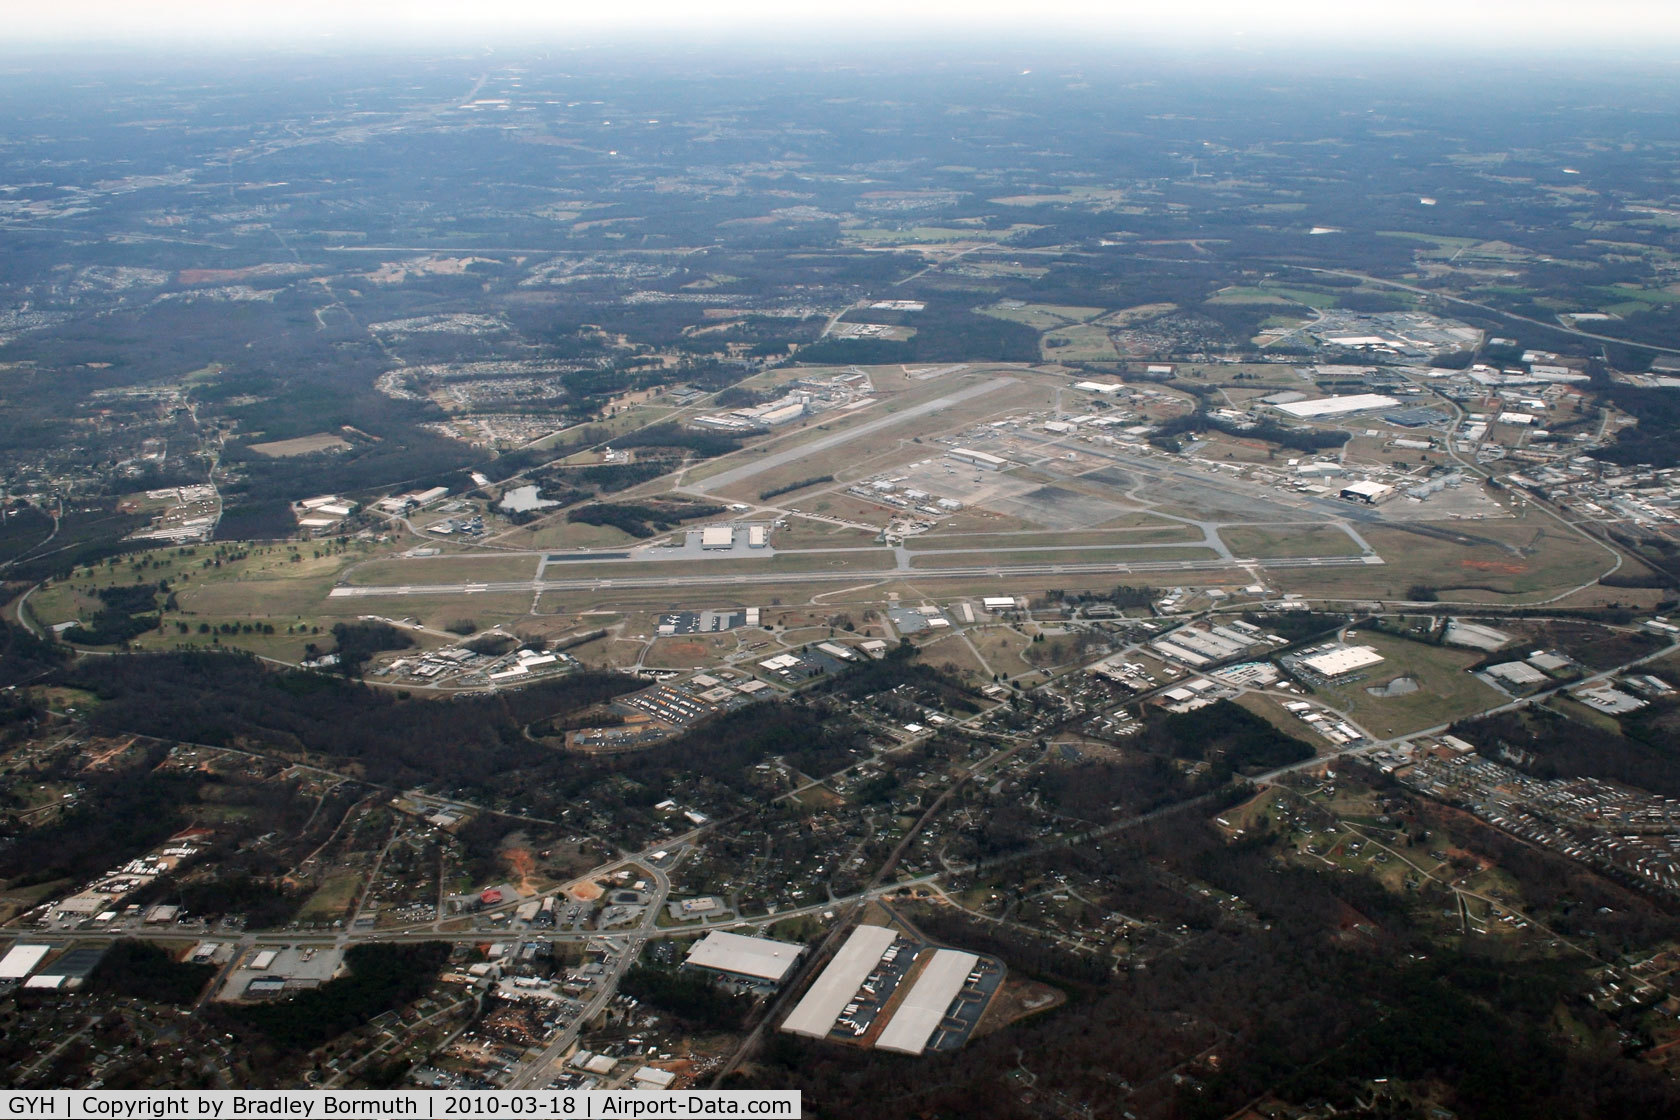 Donaldson Center Airport (GYH) - A great day to take pictures!